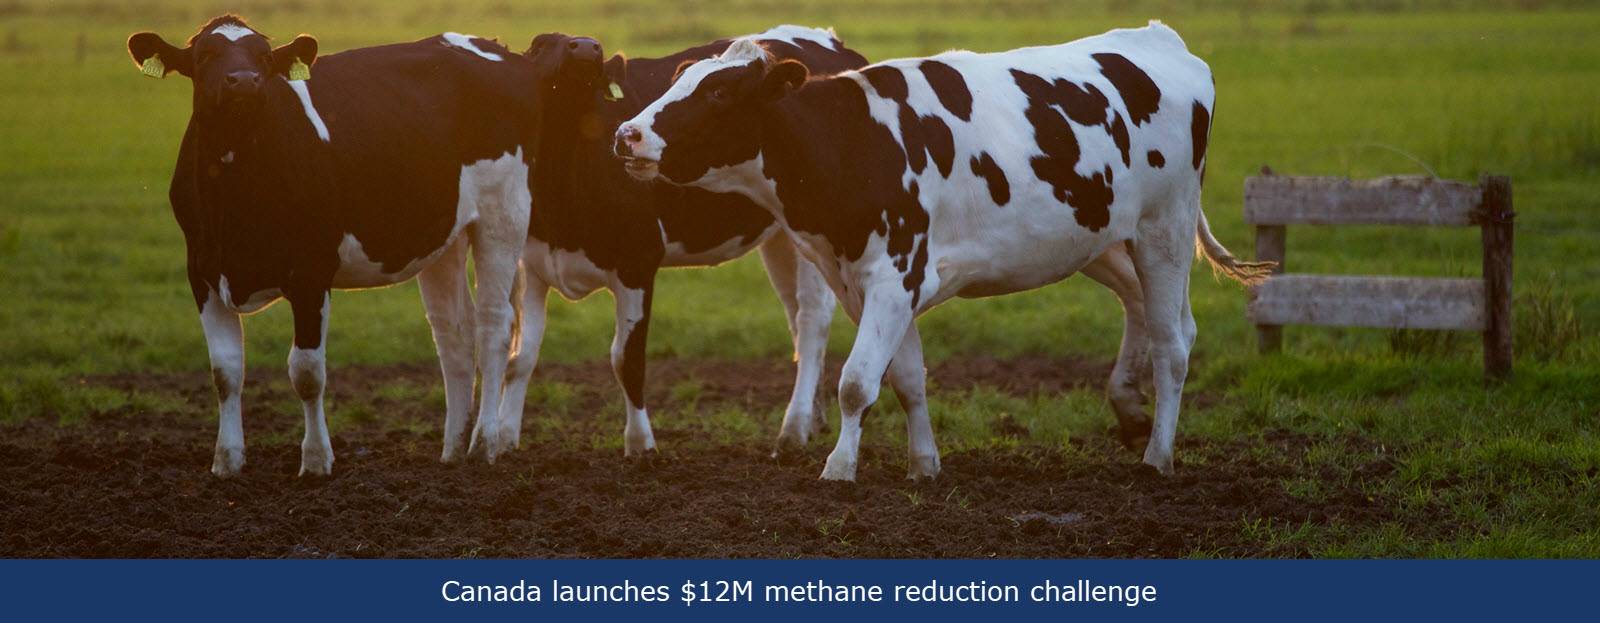 Canada launches $12M methane reduction challenge